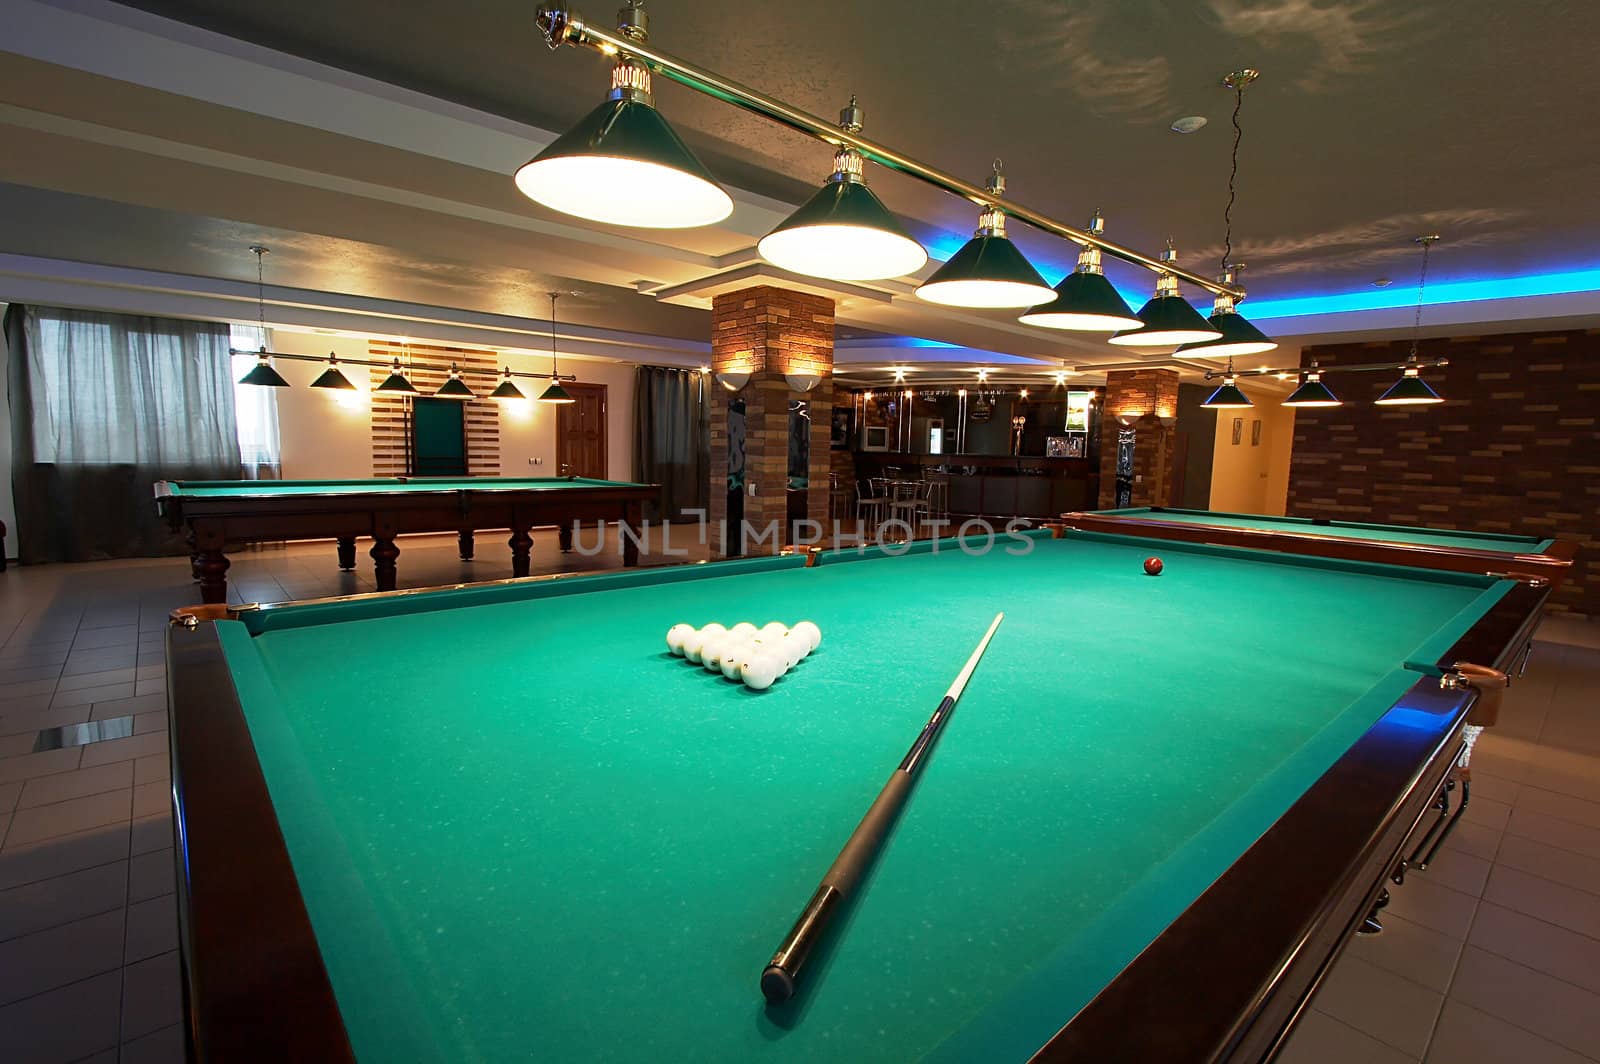 Table for game in billiards by terex